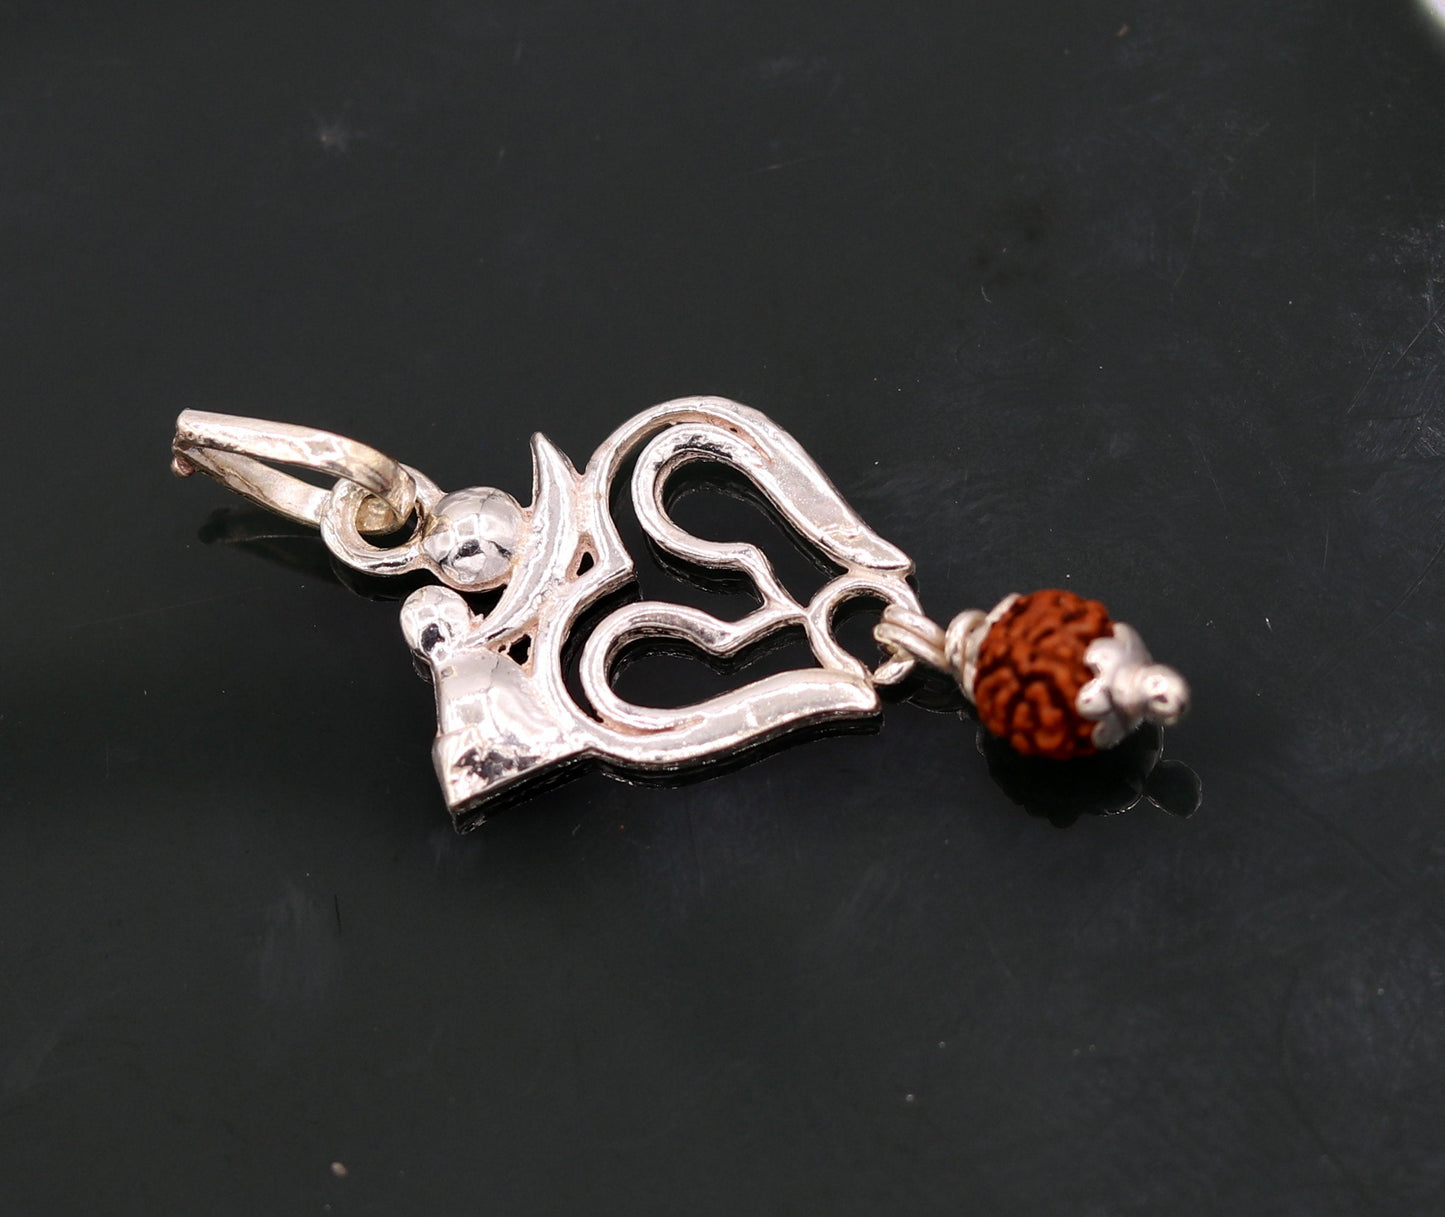 Amazing Lord shiva trident with real rudraksha beads solid silver pendant unisex jewelry tribal jewelry from Rajasthan india nsp94 - TRIBAL ORNAMENTS